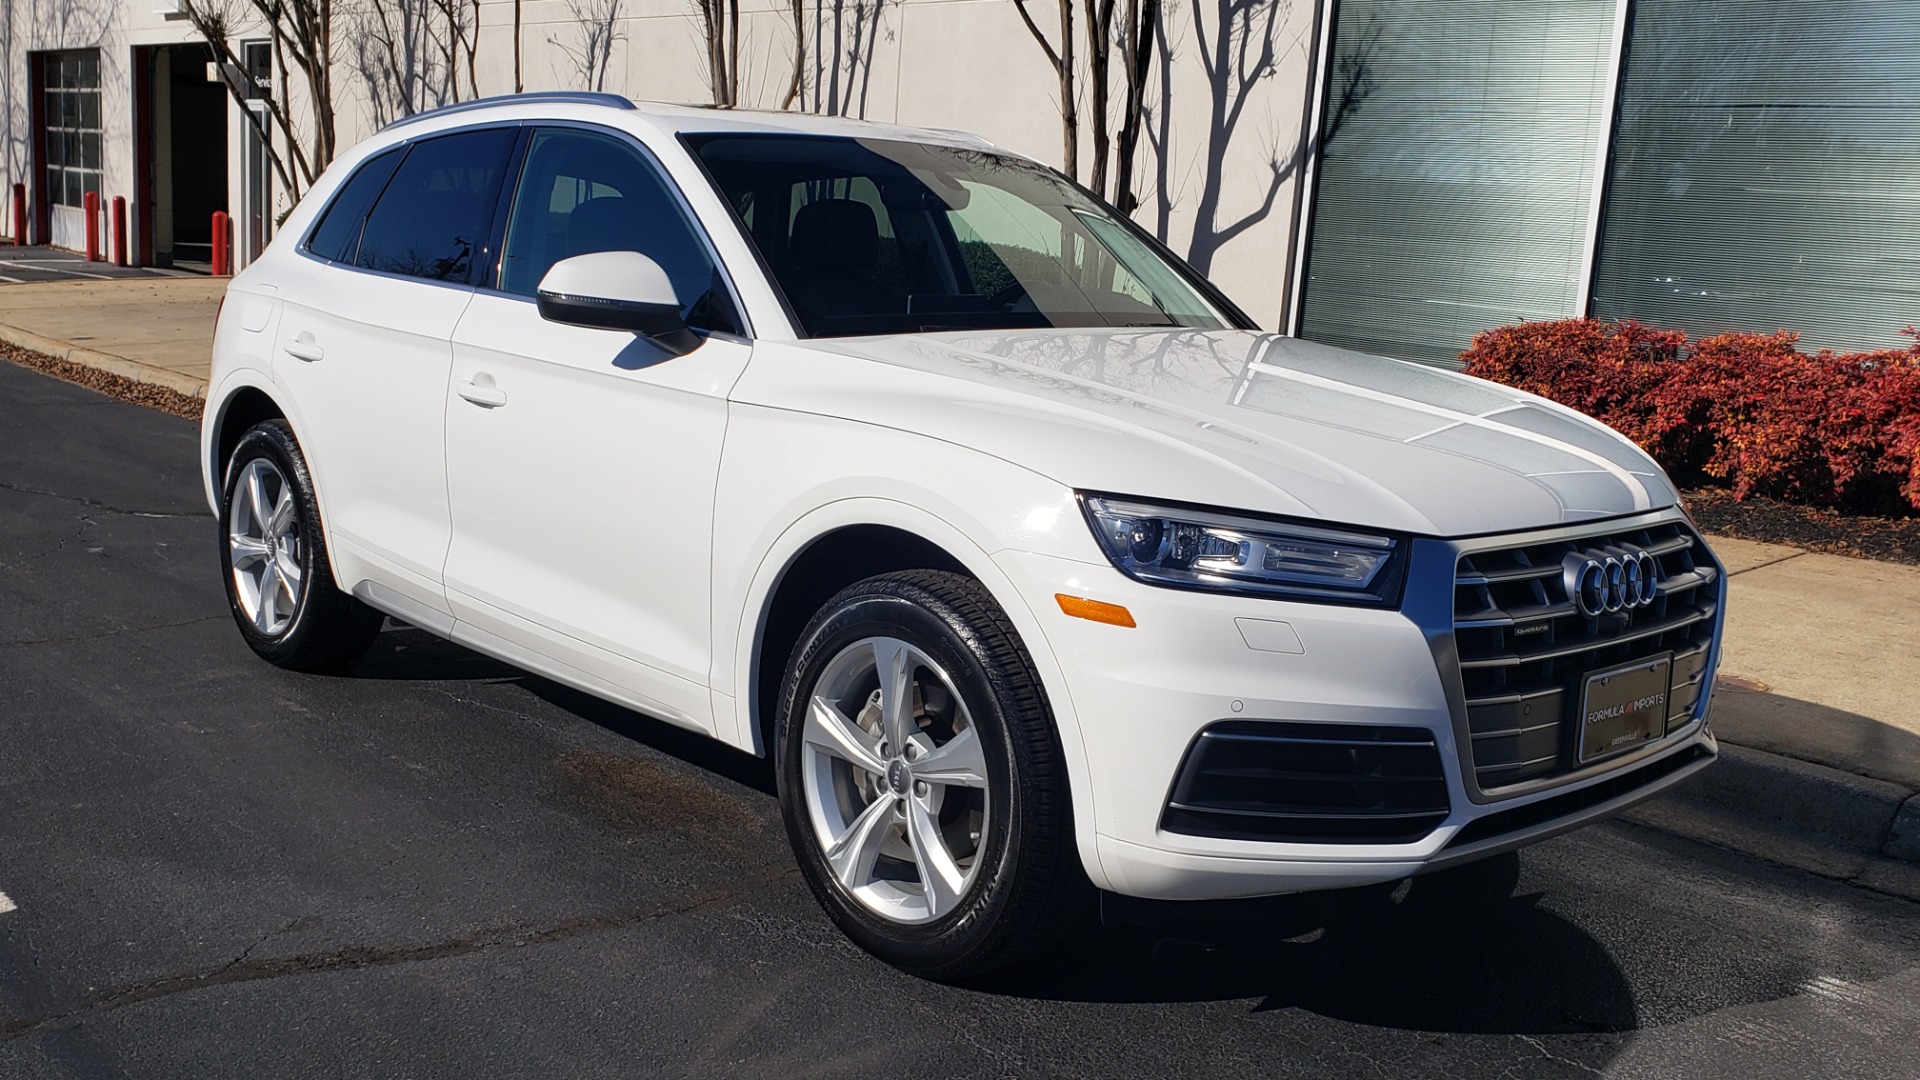 Used 2019 Audi Q5 PREMIUM PLUS 2.0L / AWD / NAV / PANO-ROOF / DRVR ASST / REARVIEW for sale $32,000 at Formula Imports in Charlotte NC 28227 5